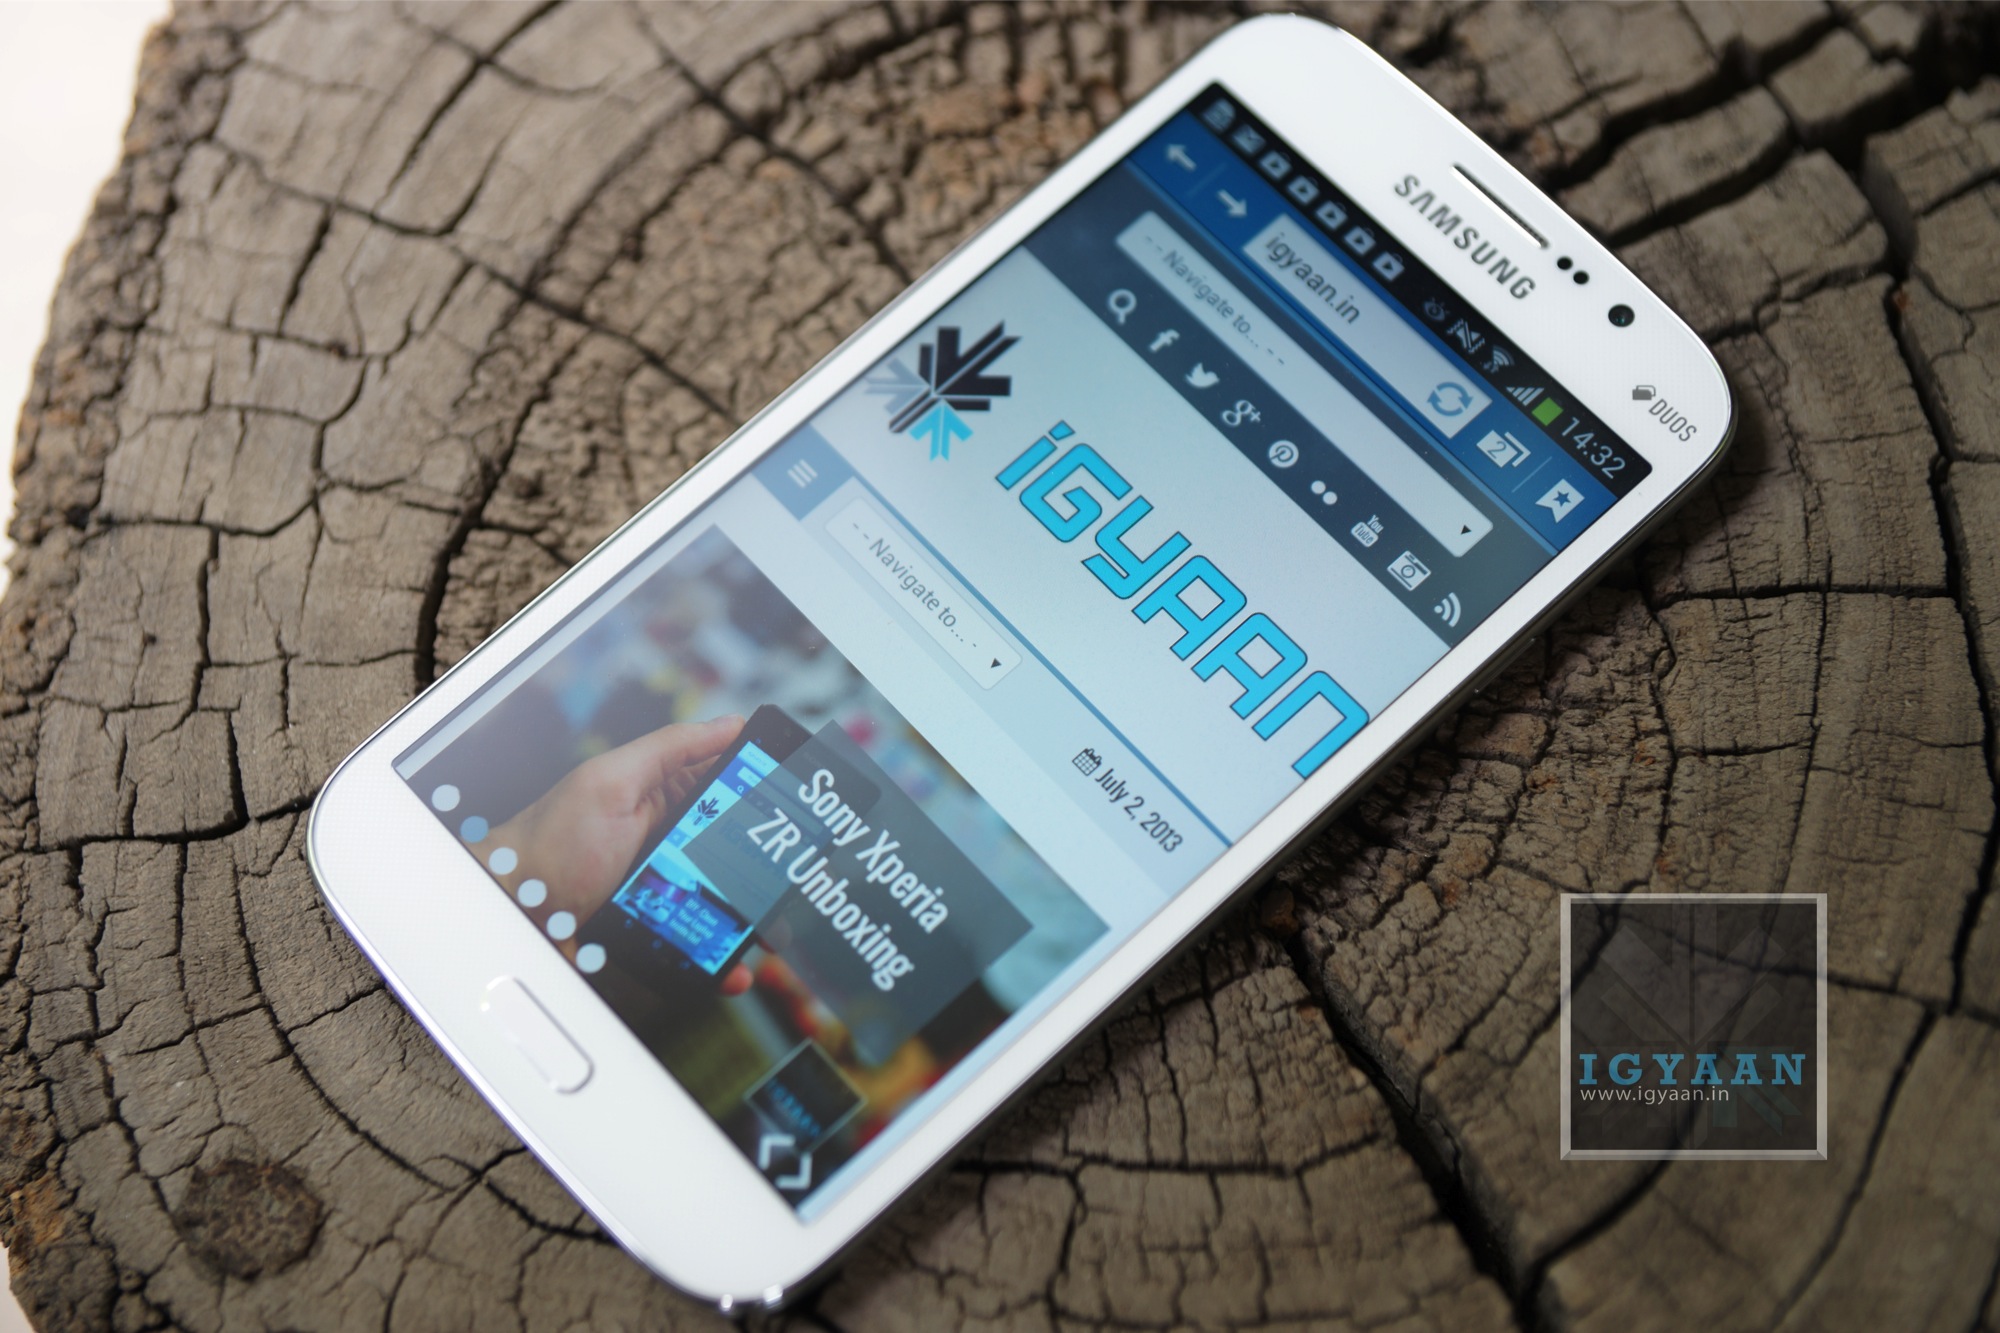 Samsung Galaxy Mega 5.8 Review, Cheapest Price in India 